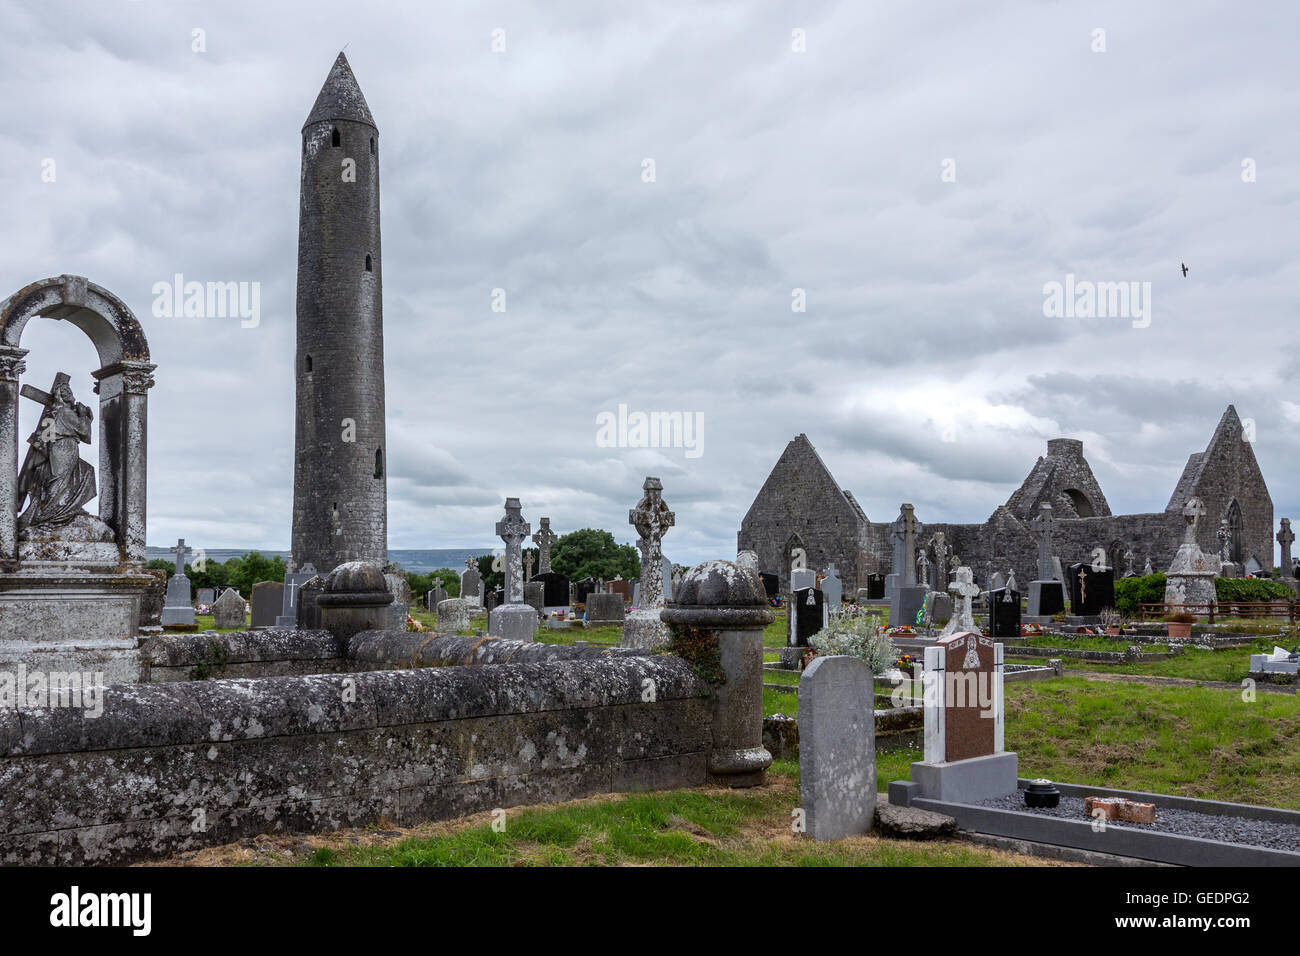 Kilmacduagh Monastery and Round Tower - a ruined abbey near the town of Gort in County Galway, Ireland. Stock Photo